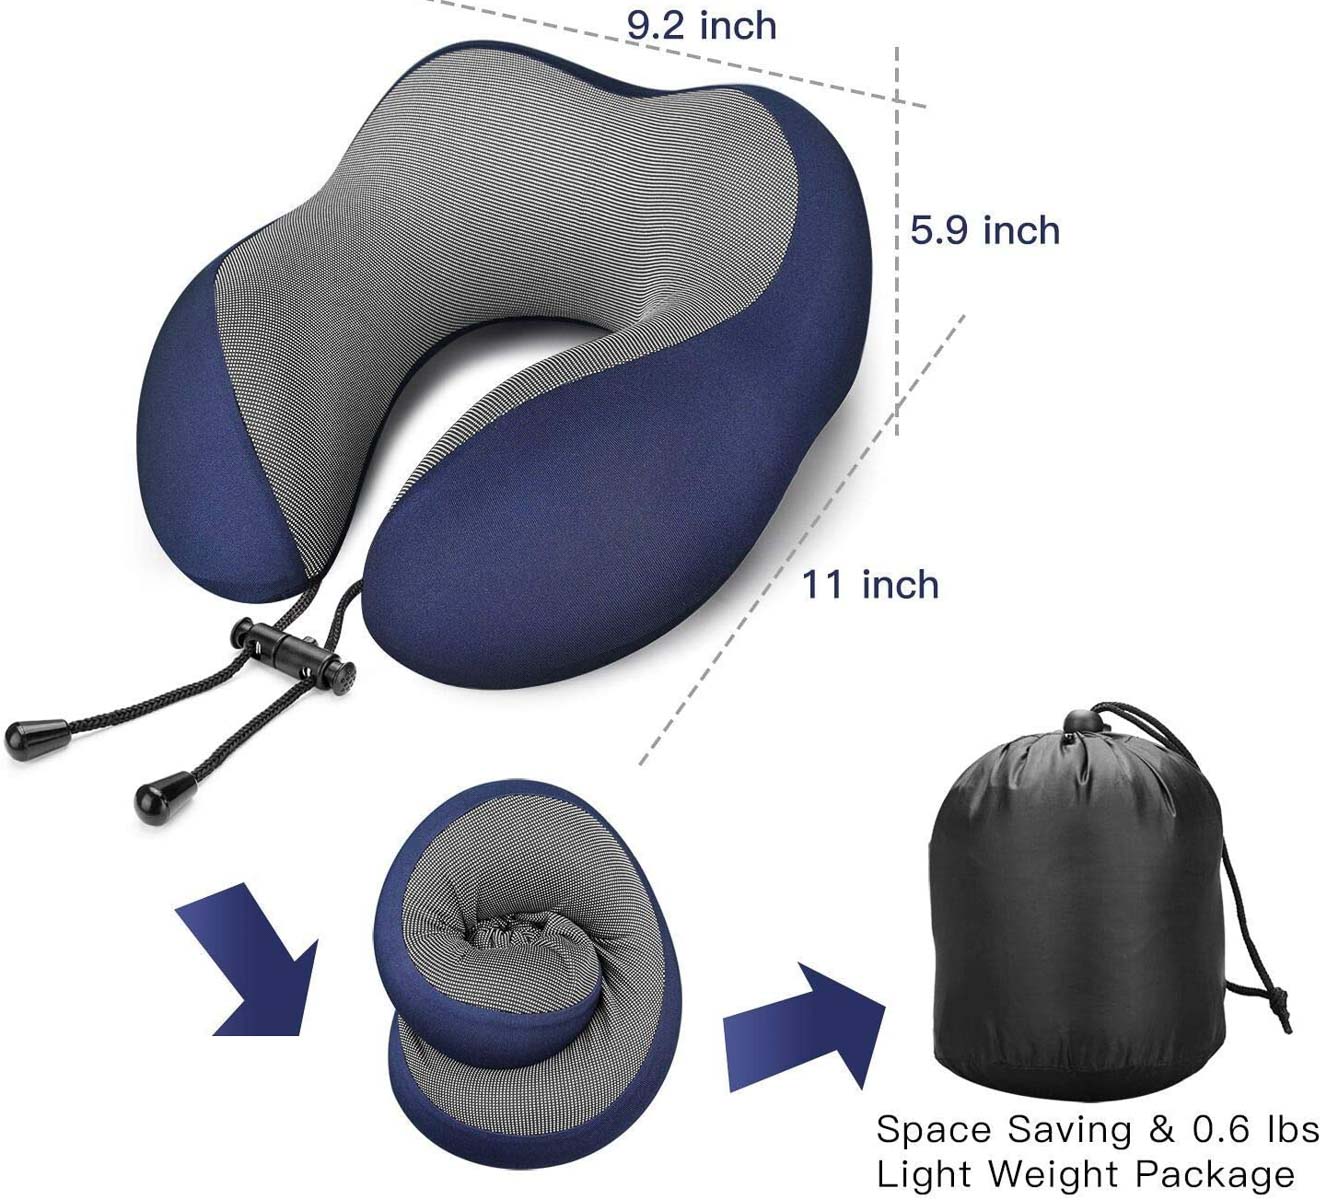 Memory foam travel pillow that compresses to half its size for travel